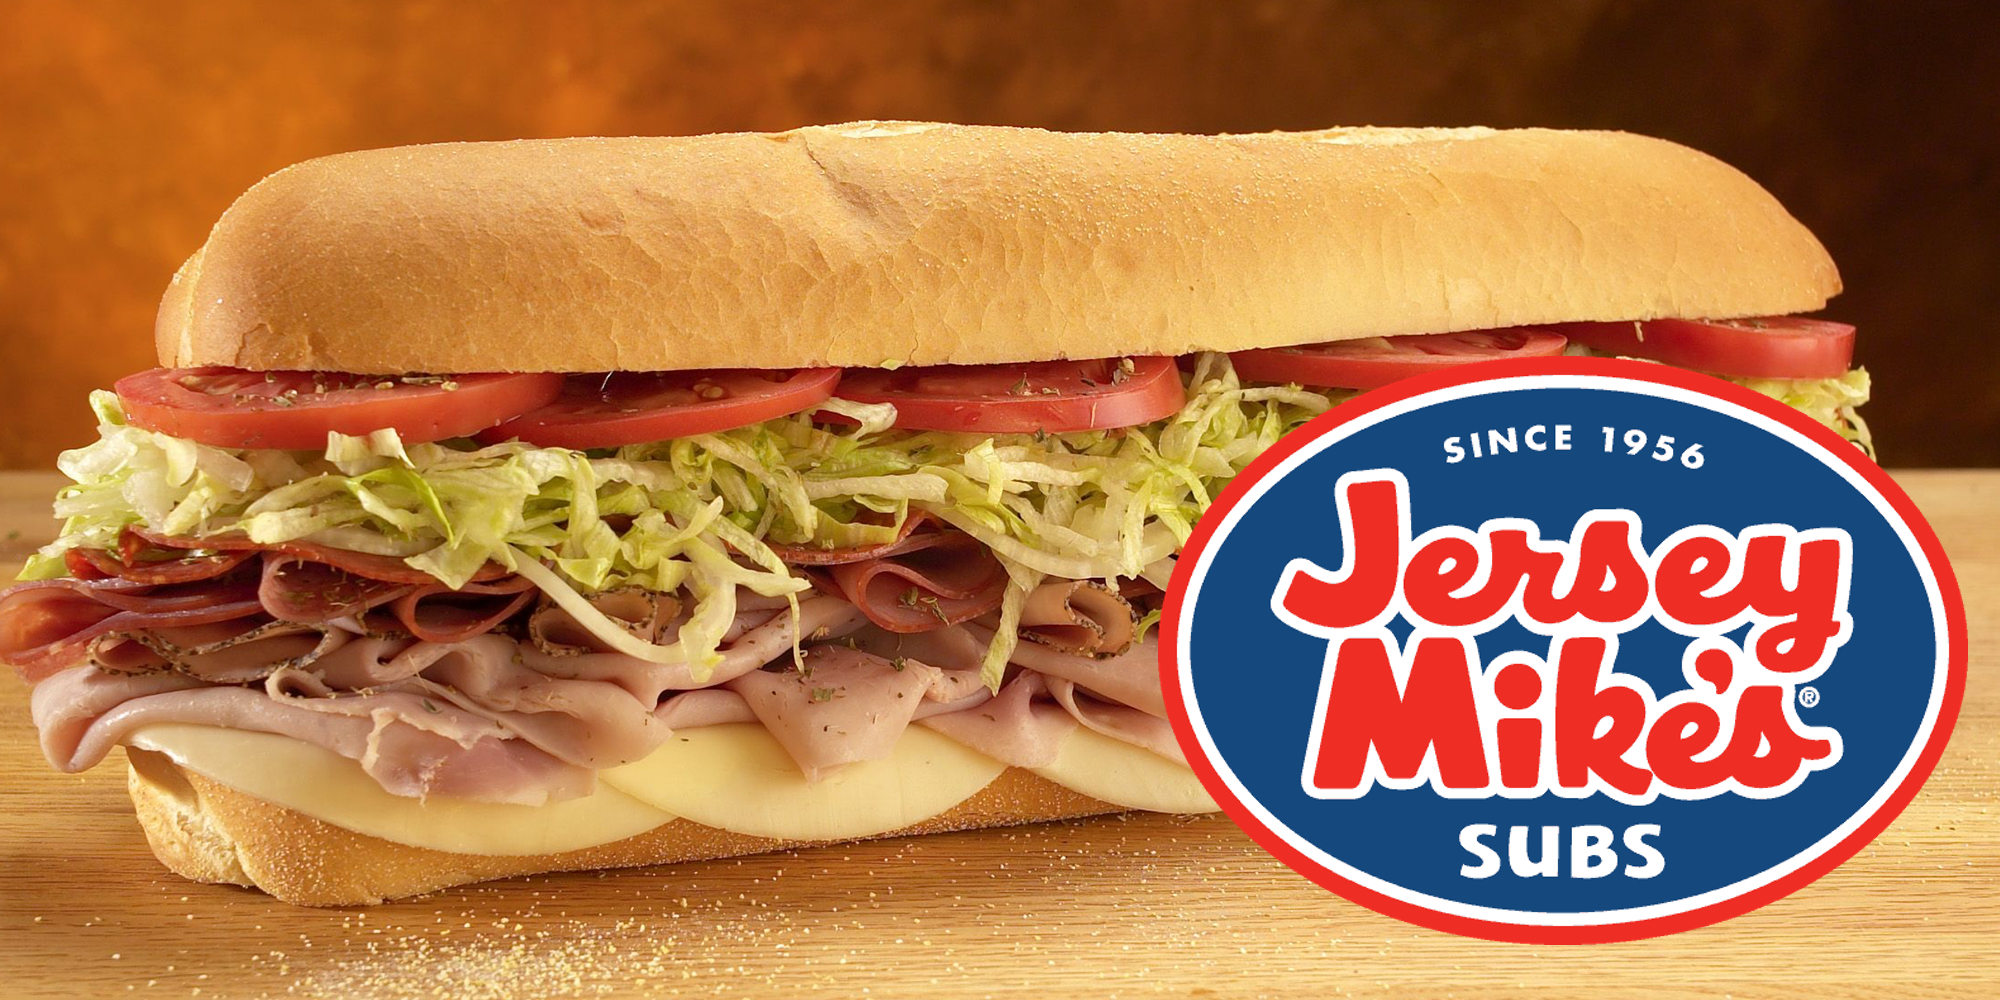 the nearest jersey mike